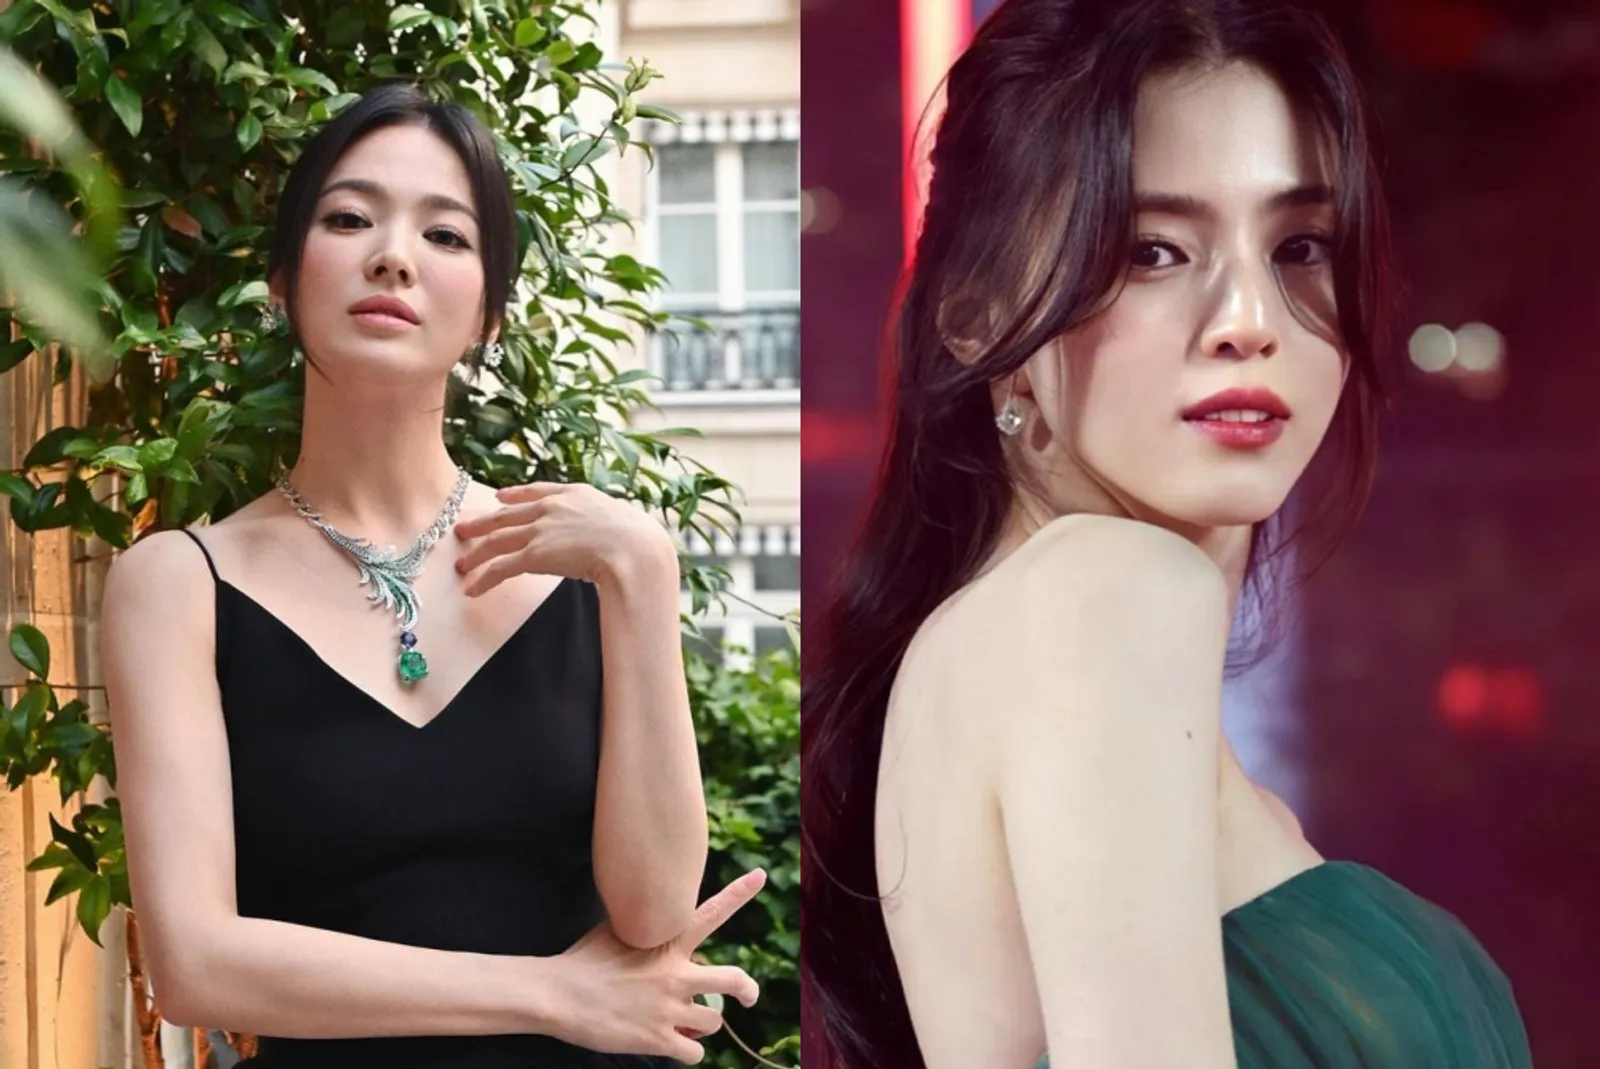 Fakta 'The Price of Confession', Song Hye Kyo & Han So Hee Adu Akting